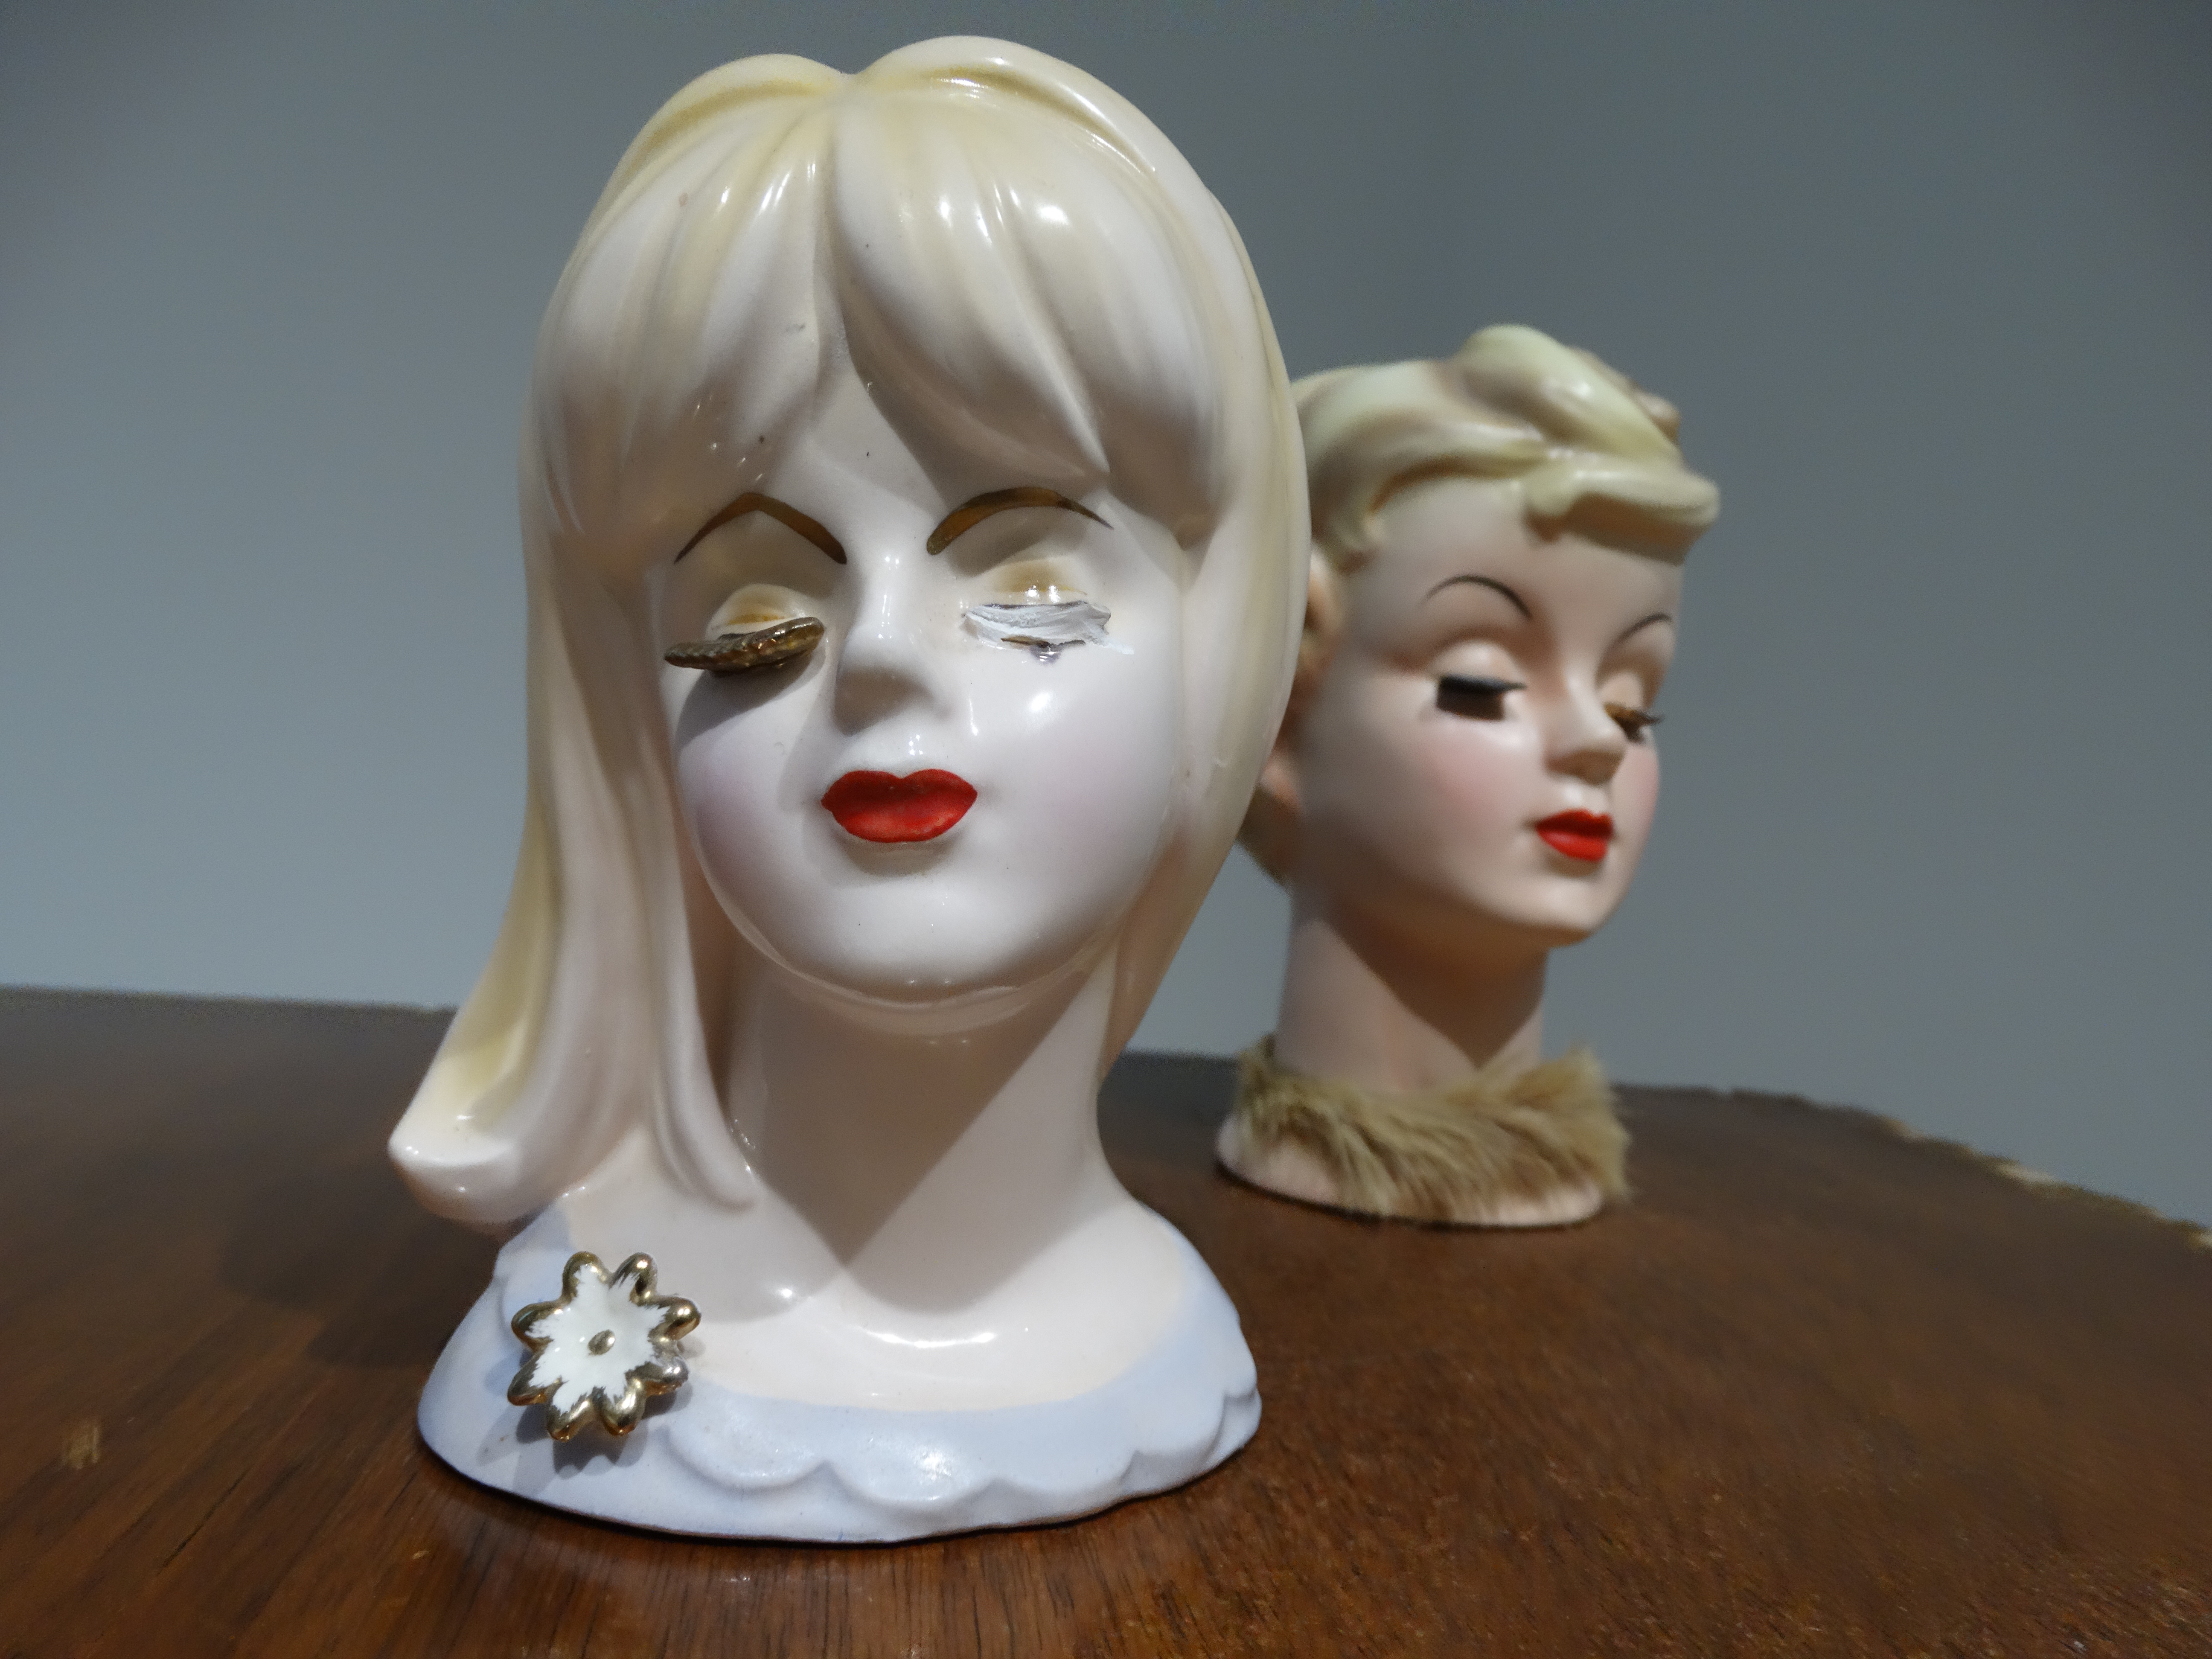 Photograph of two ceramic heads